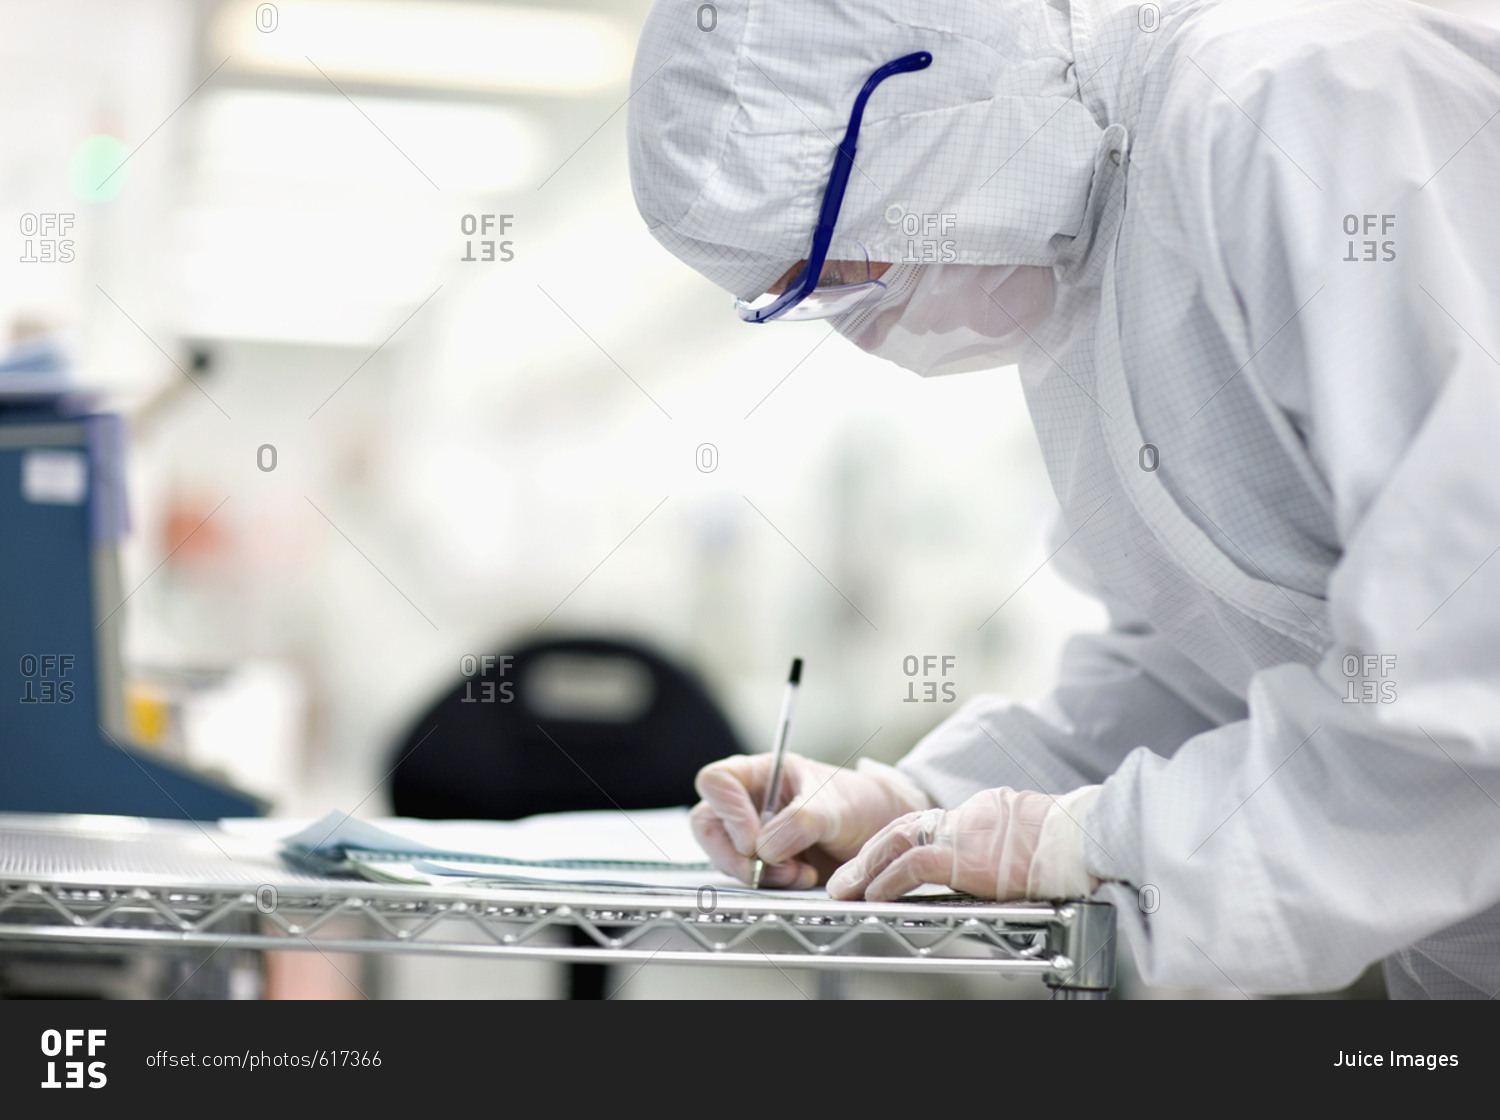 Engineer in clean suit taking notes in silicon wafer manufacturing laboratory